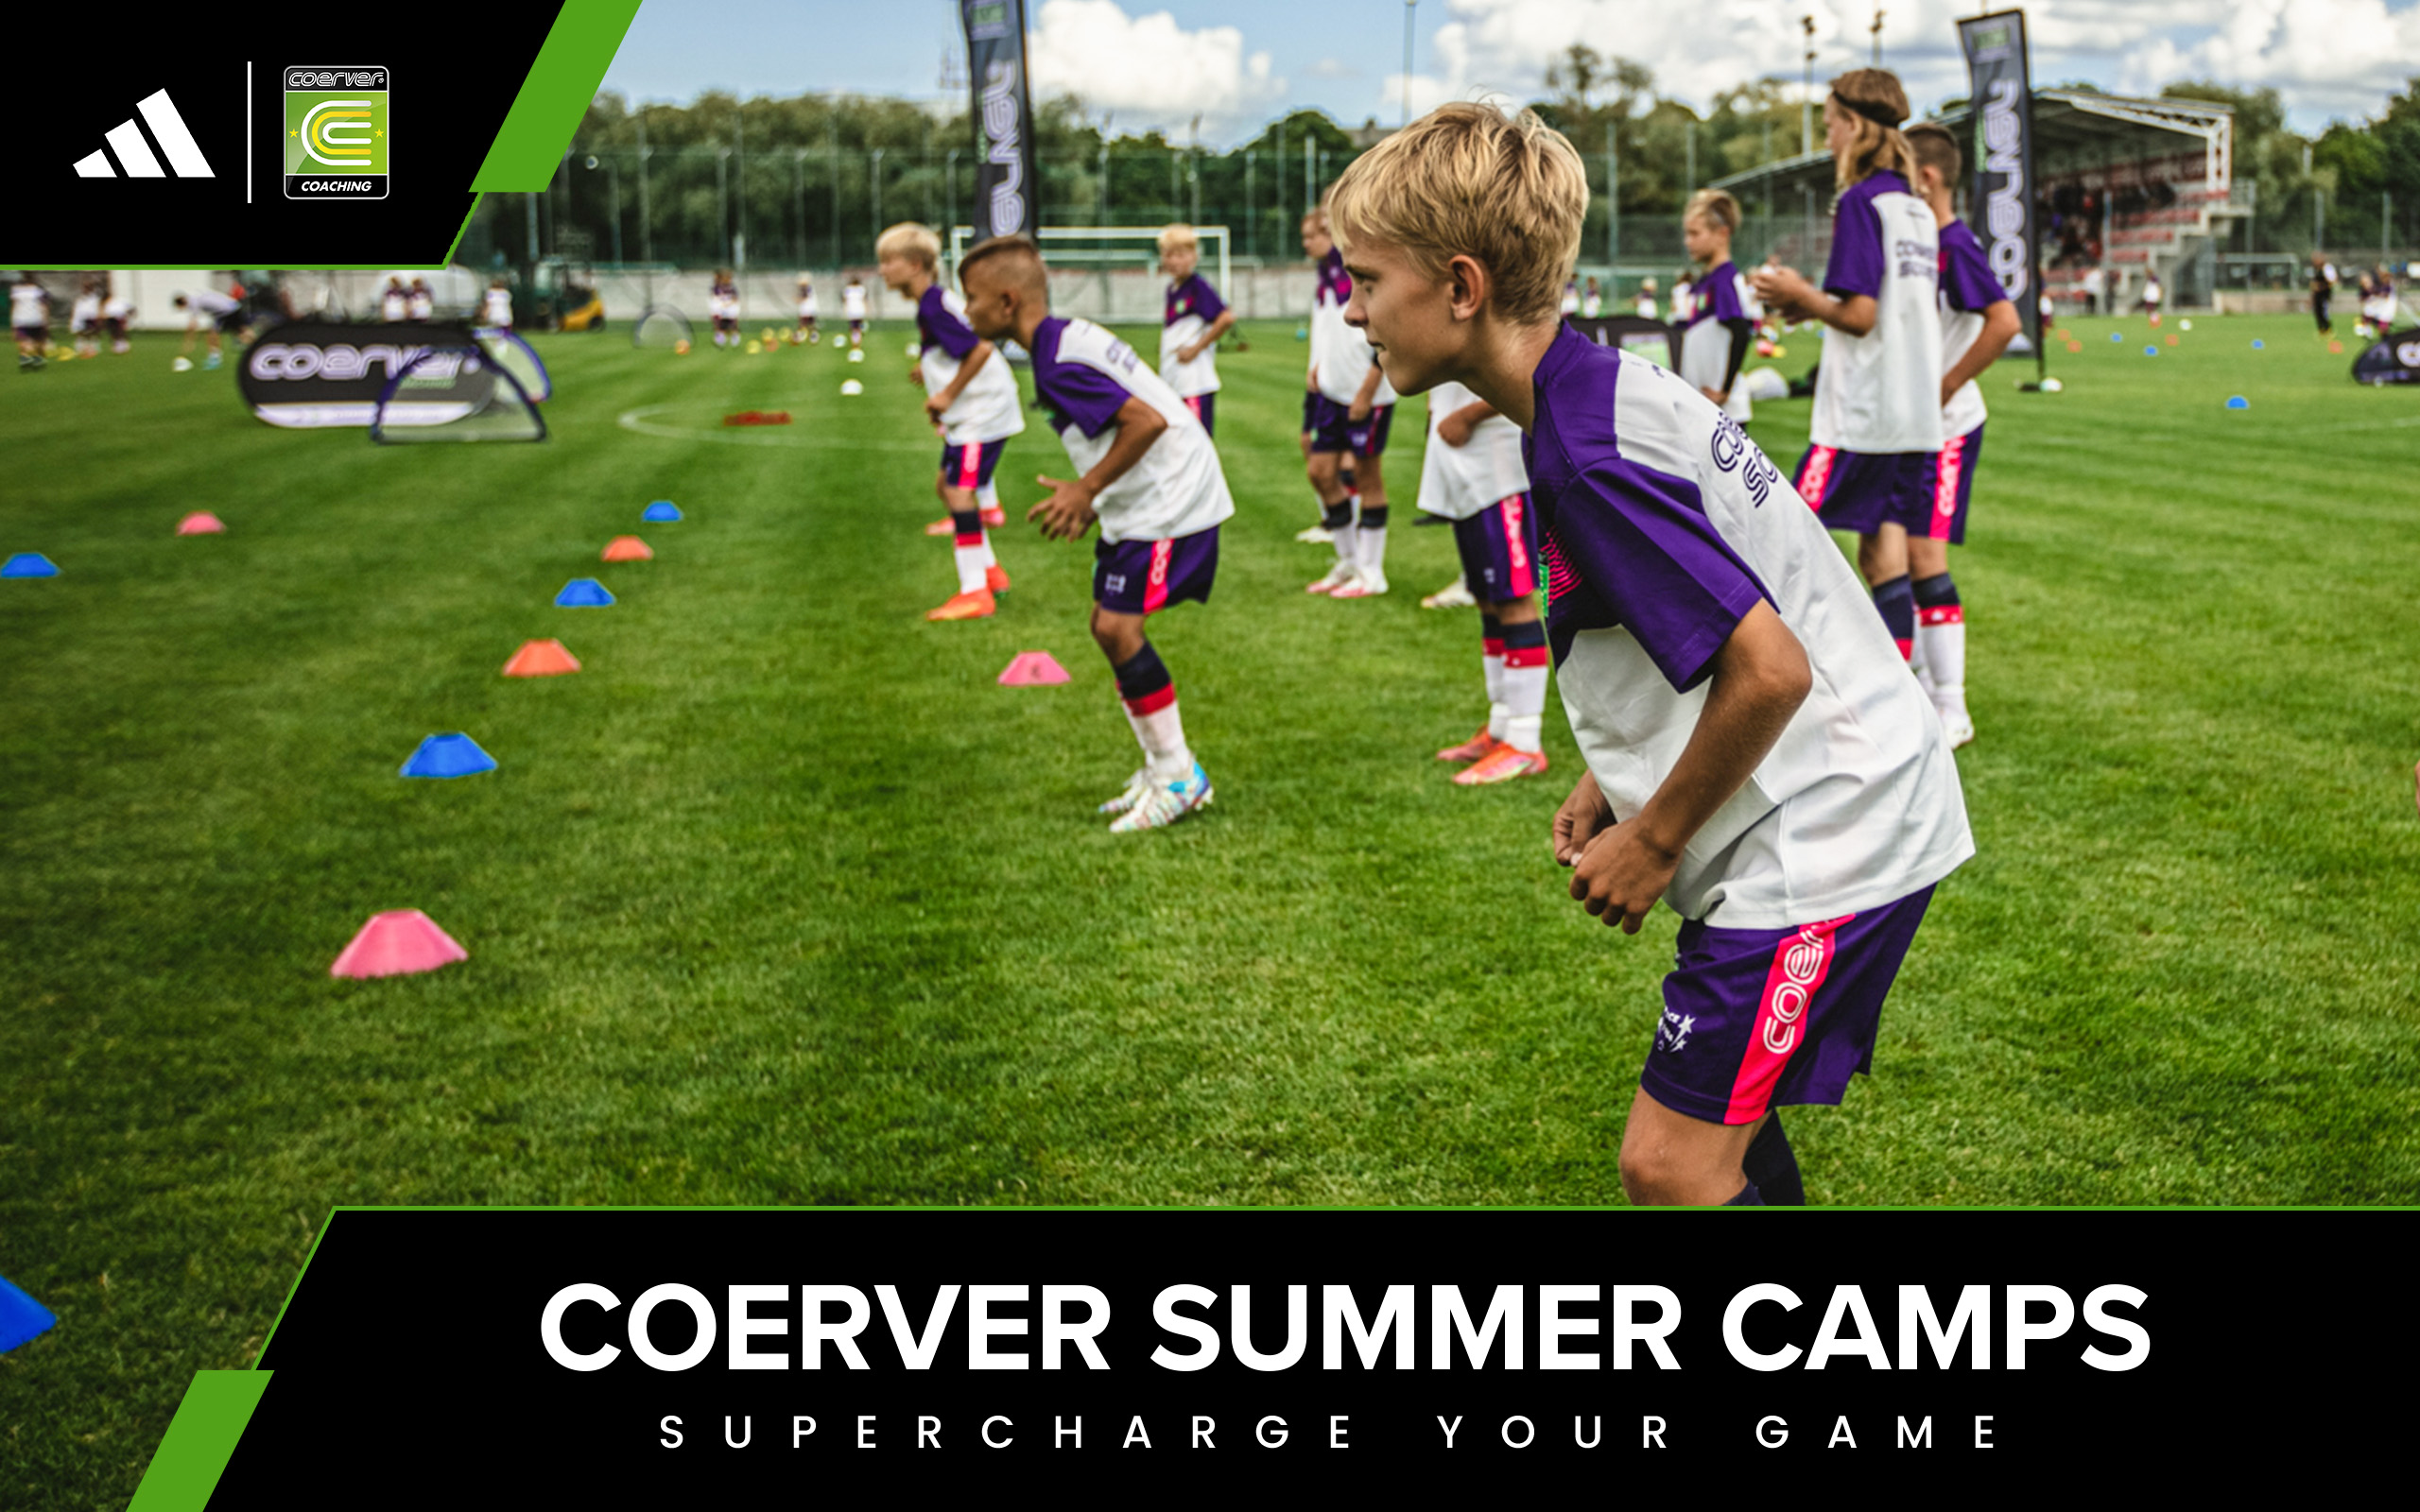 Supercharge your game with Coerver Summer Camps